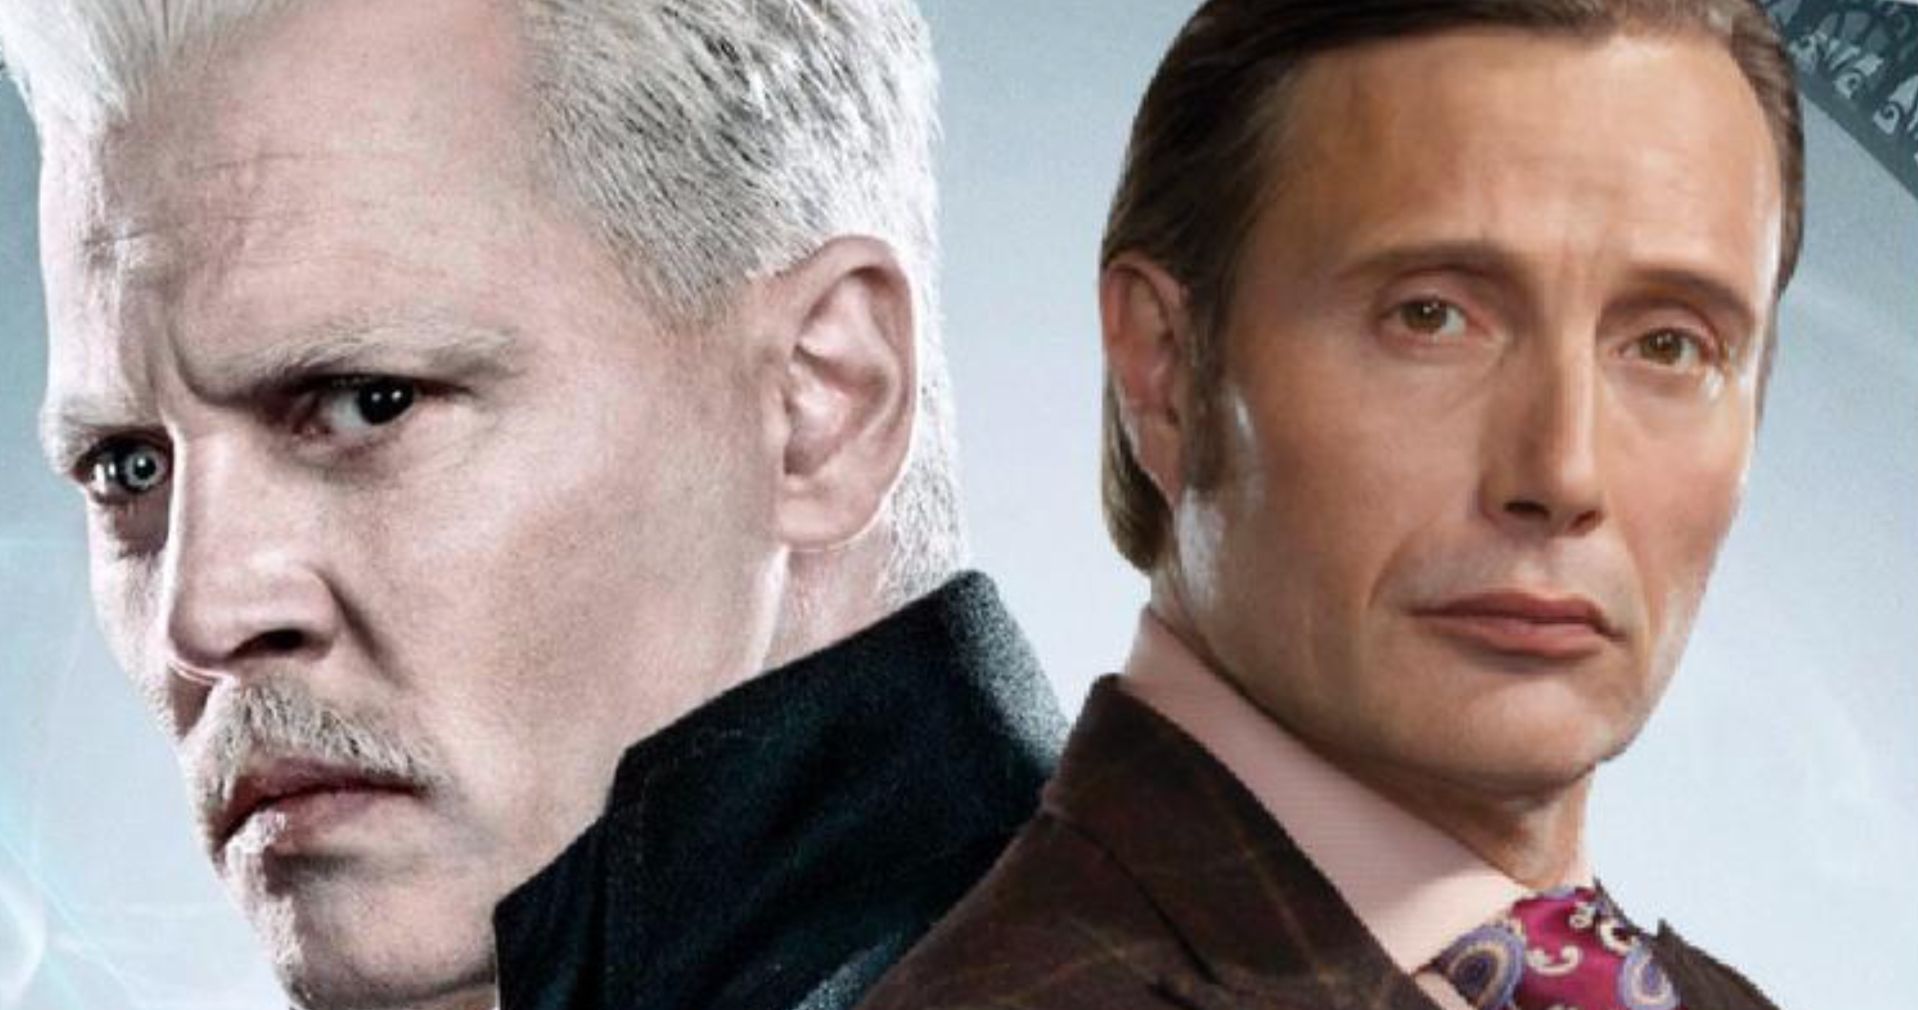 Mads Mikkelsen Officially Replaces Johnny Depp as Grindelwald in Fantastic Beasts 3